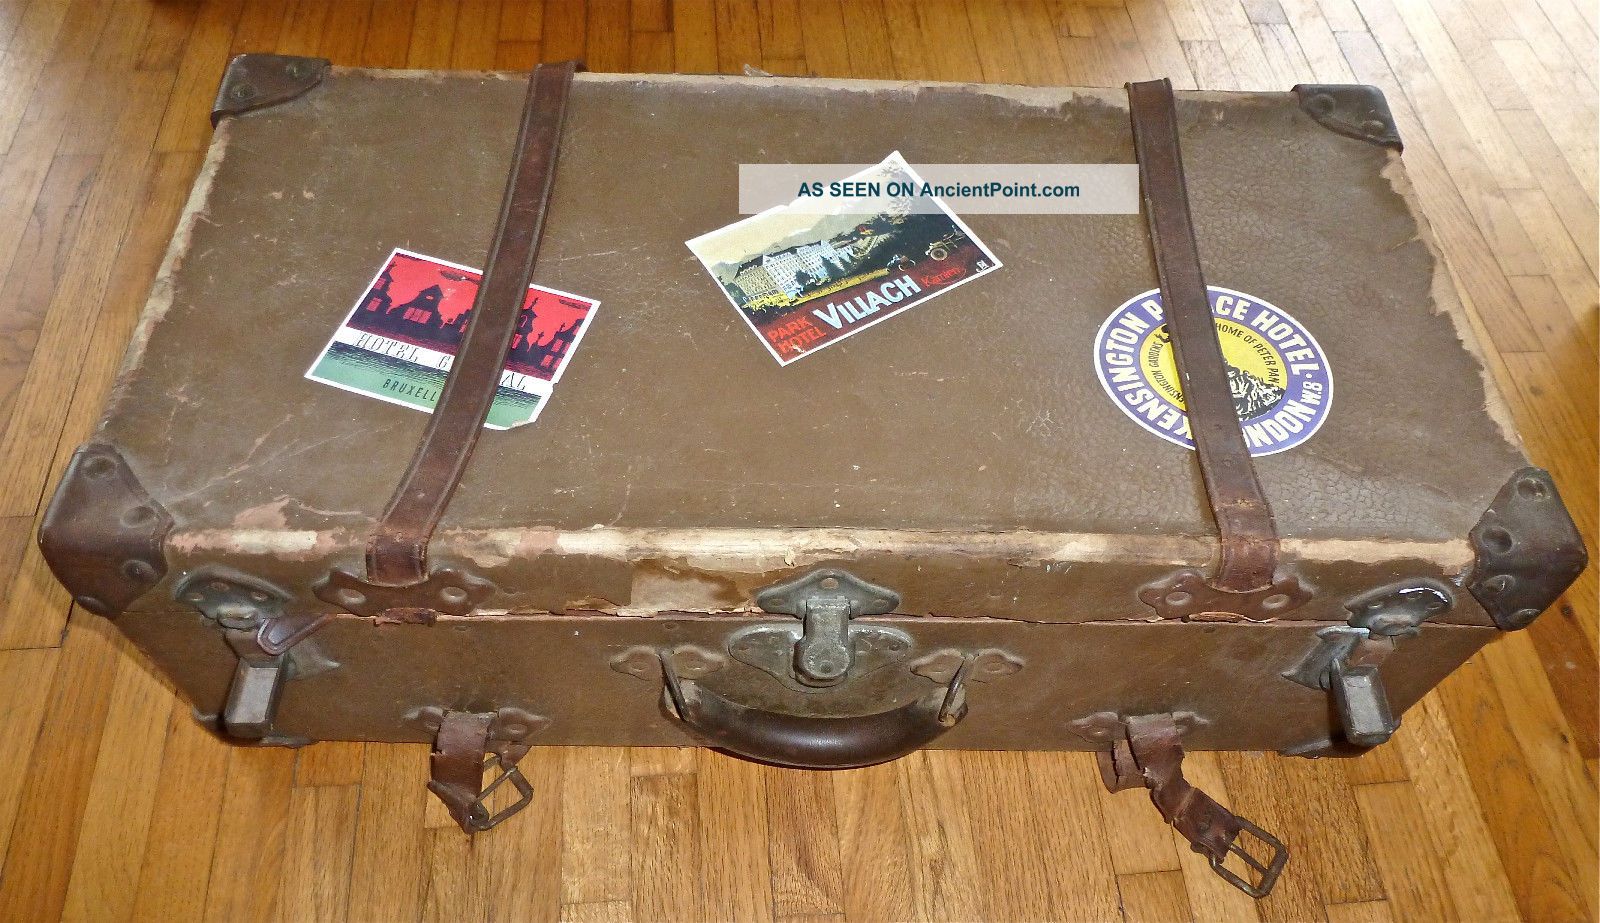 Big Vtg Pirate Rustic Shabby Chic Style Old Suitcase Trunk Travel Decals Straps 1900-1950 photo